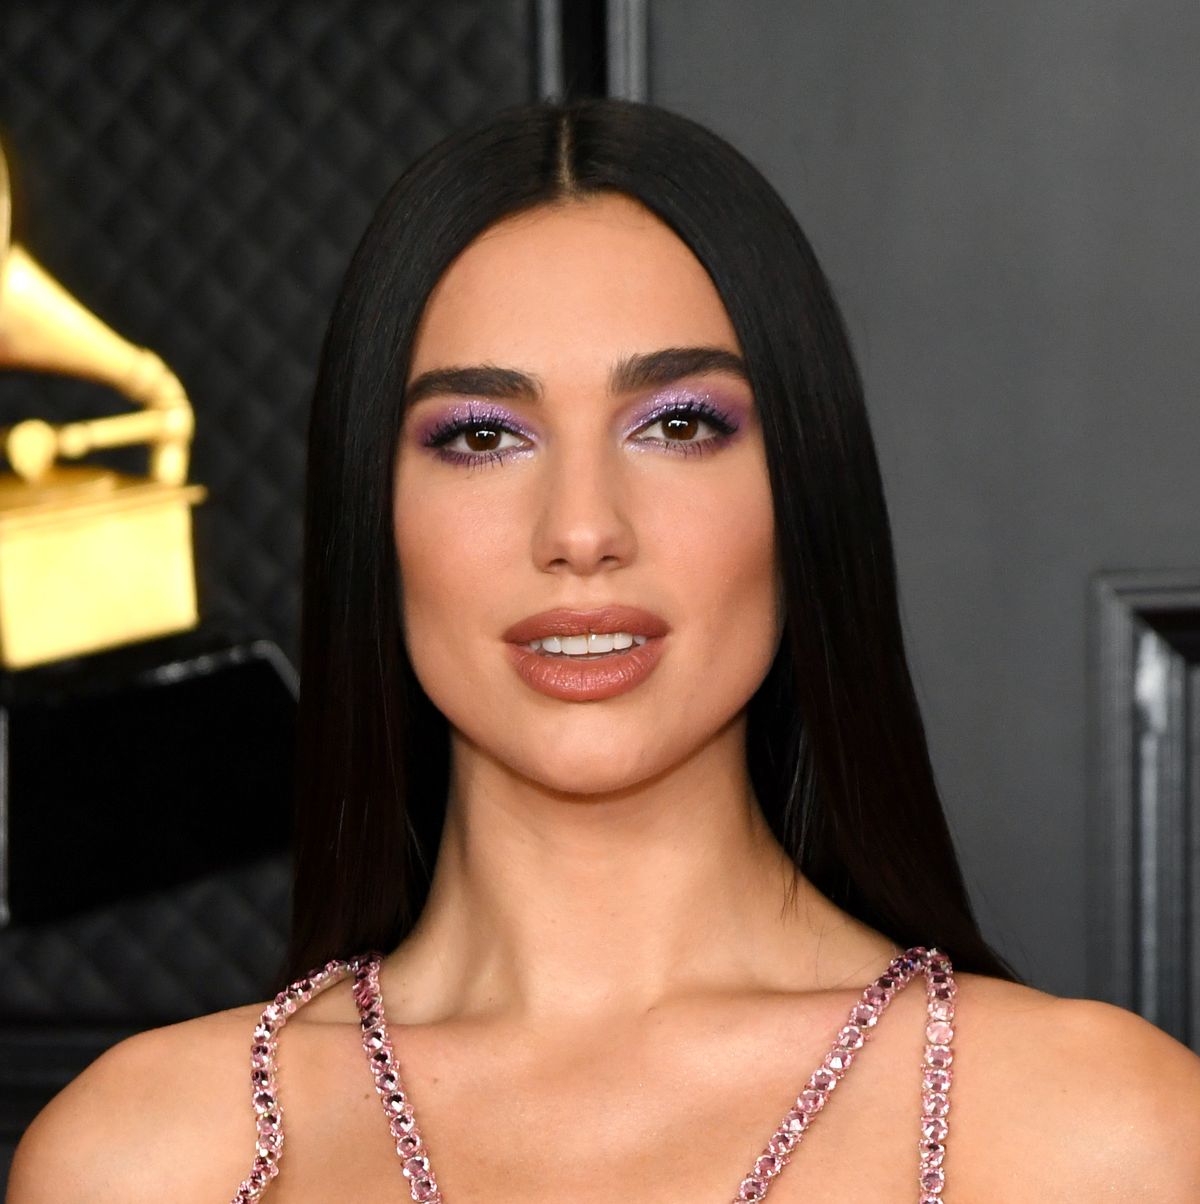 Dua Lipa Surprised and Horrified After DaBaby's Homophobic Speech at  Rolling Loud